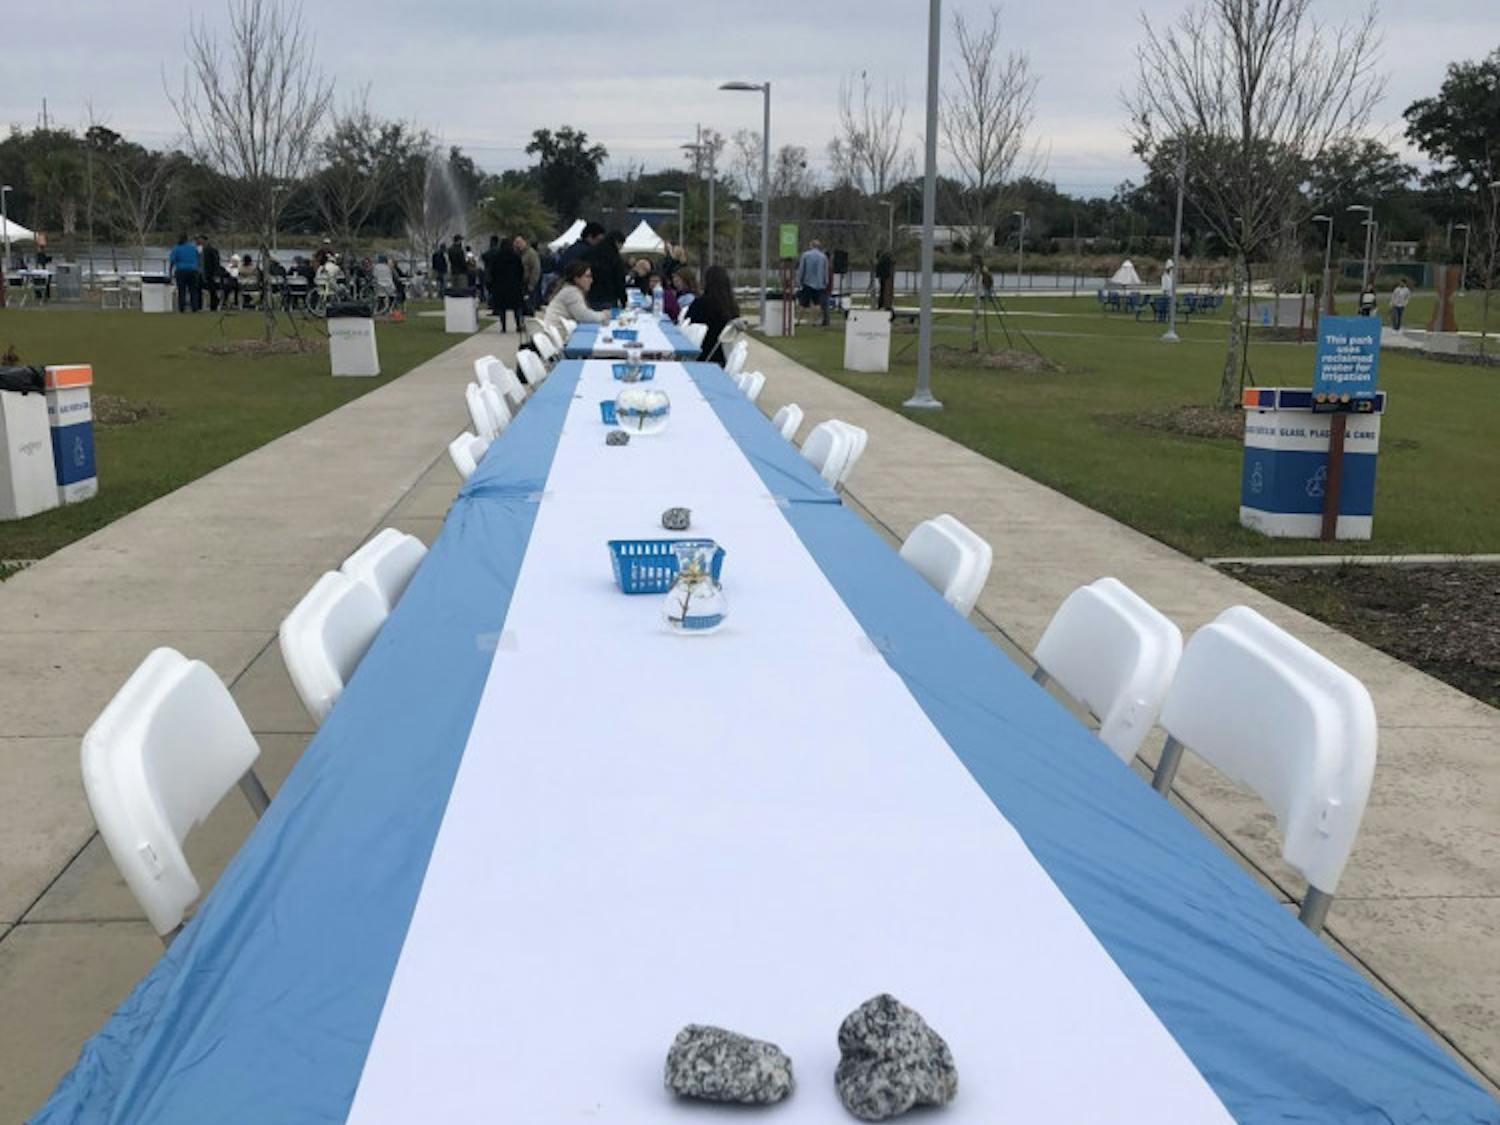 The City of Gainesville hosted the third annual Longest Table Event at Deport Park at 874 SE 4th St., a community outreach event for elected officials to speak with citizens at different tables while eating food.